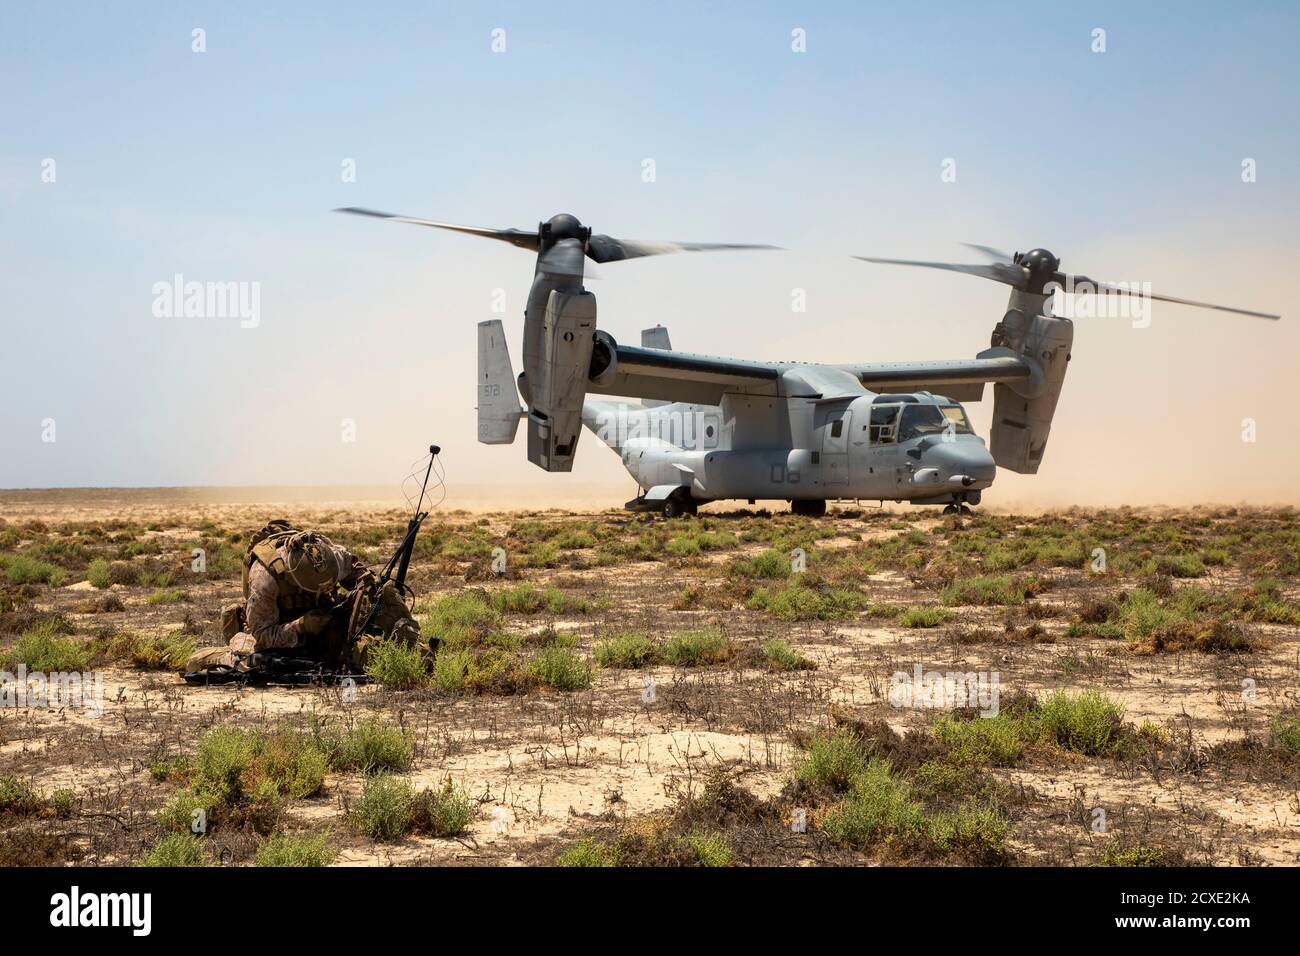 A U.S. Marine with 2nd Battalion, 5th Marine Regiment, assigned to Special Purpose Marine-Air Ground Task Force - Crisis Response - Central Command 20.2, sets up communication equipment during a Tactical Recovery of Aircraft and Personnel (TRAP) exercise on Karan Island, Kingdom of Saudi Arabia, July 13, 2020. The TRAP training prepares Marines with the knowledge and skills to recover isolated sensitive material and personnel in the event of a downed aircraft. The SPMAGTF-CR-CC is a crisis response force, prepared to deploy a variety of capabilities across the region. (U.S. Marine Corps photo Stock Photo